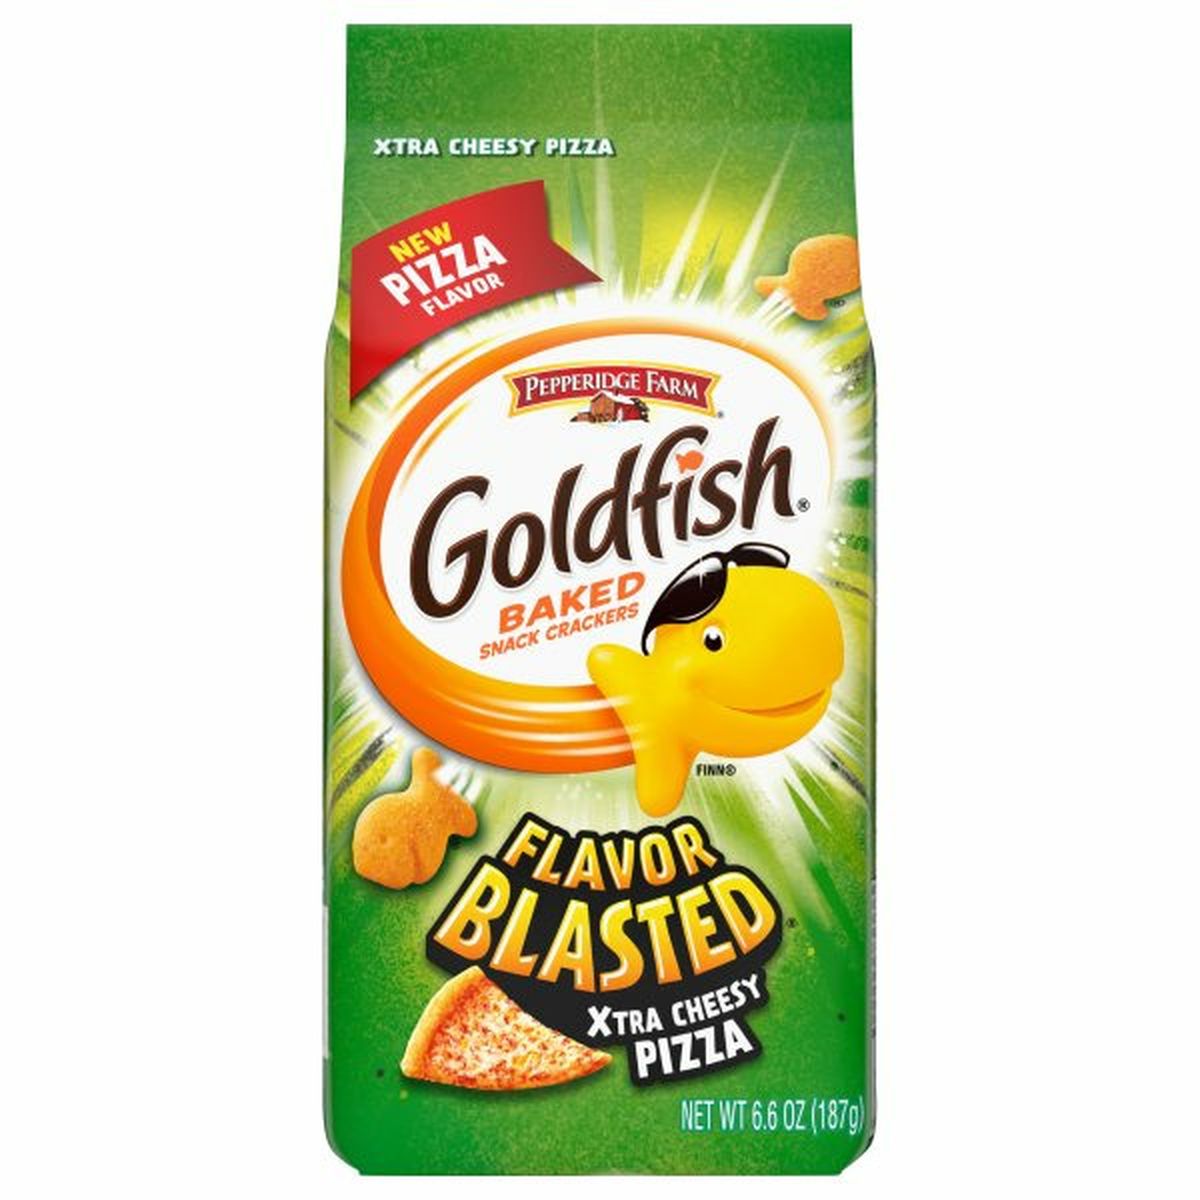 Calories in Pepperidge Farms  Goldfishs Flavor Blasteds Flavor Blasted Snack Crackers, Xtra Cheesy Pizza, Baked